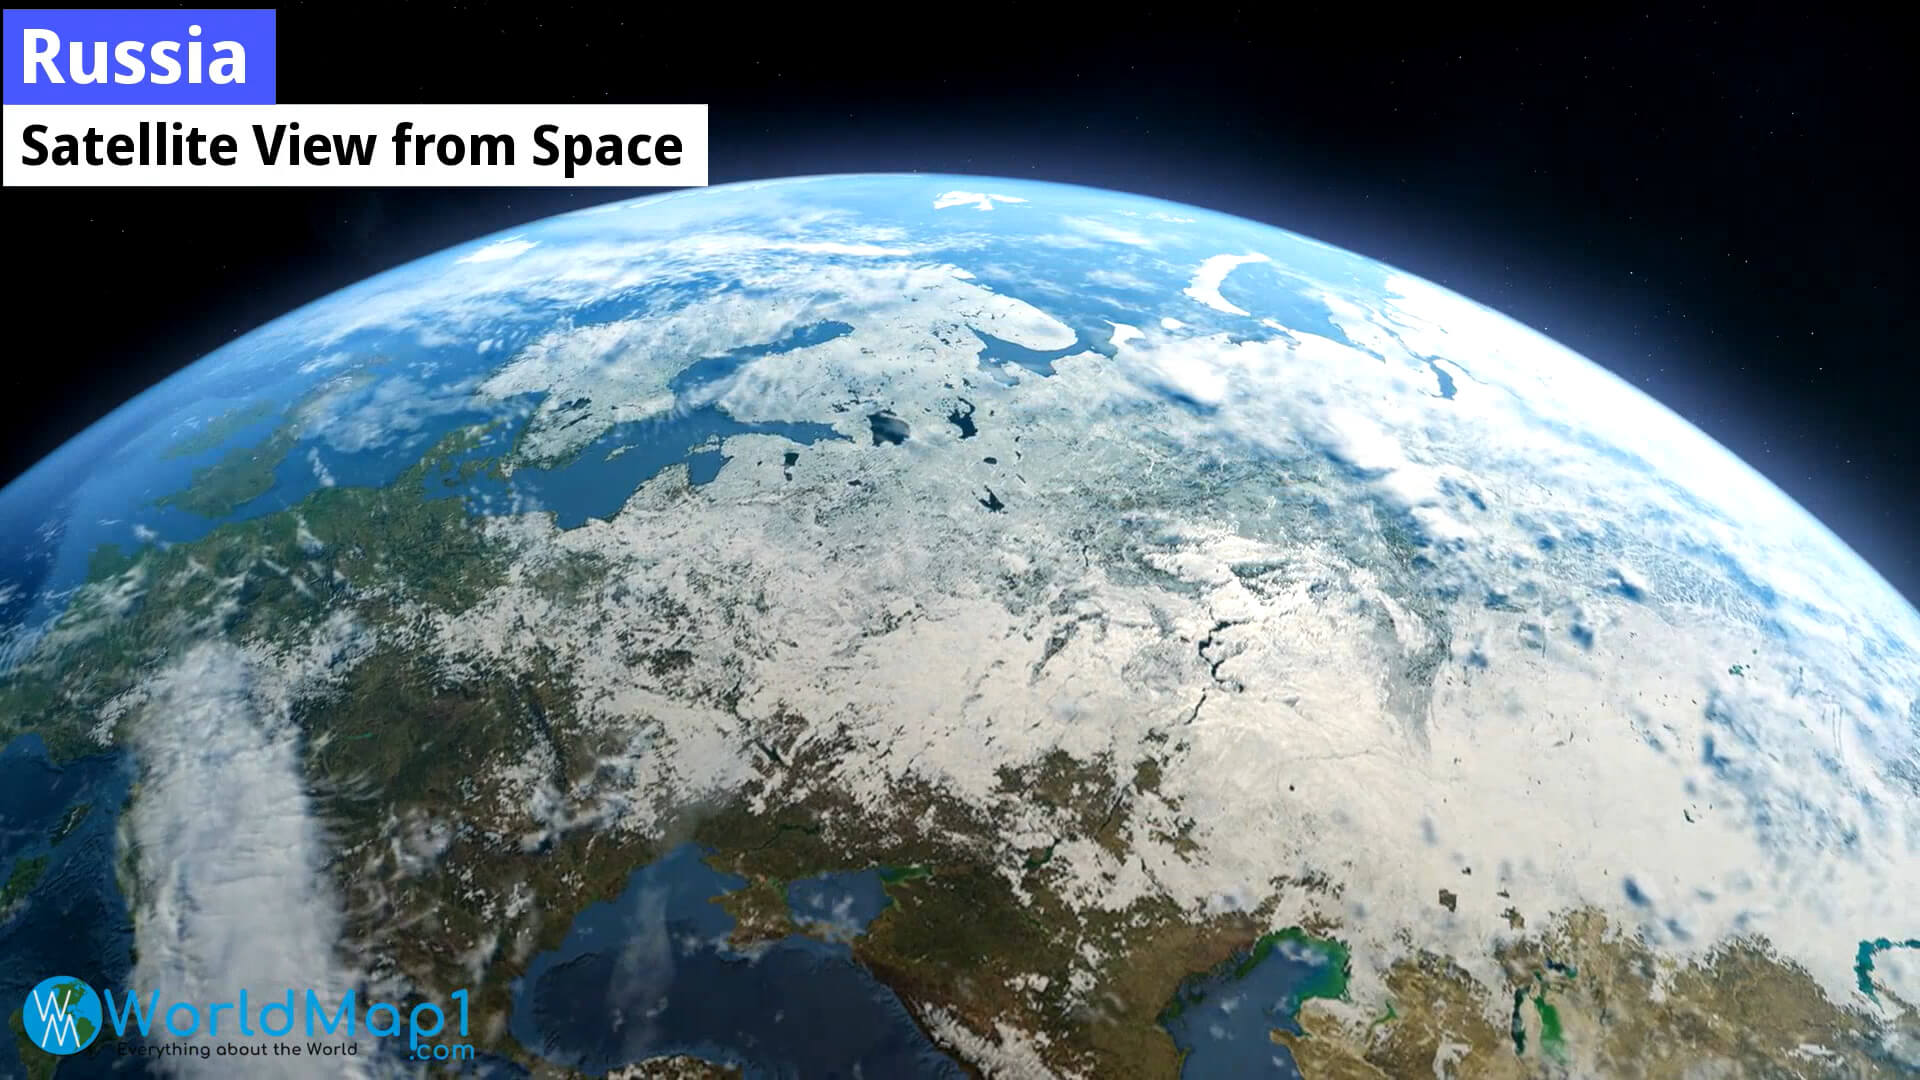 Russia Satellite View from Space